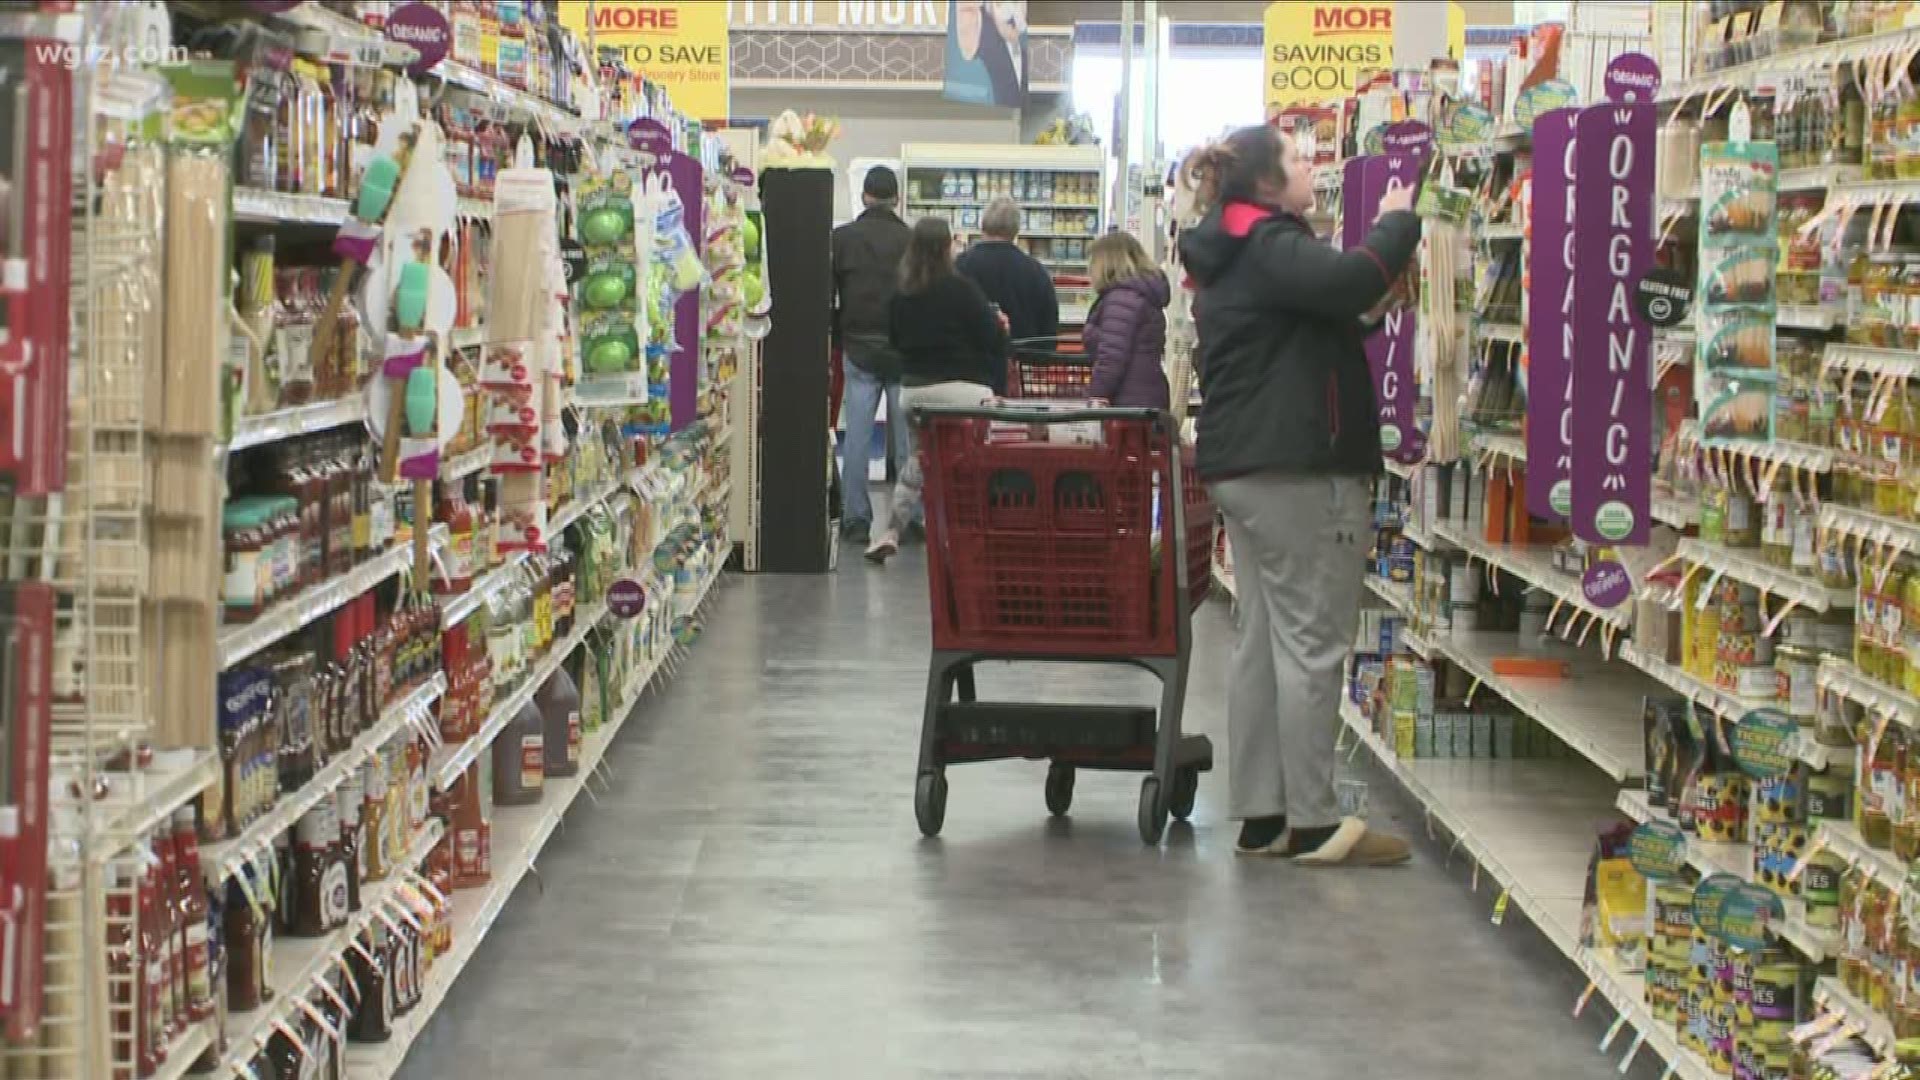 Will Bulk Bins Come Back After COVID-19? Grocery Stores Weigh in